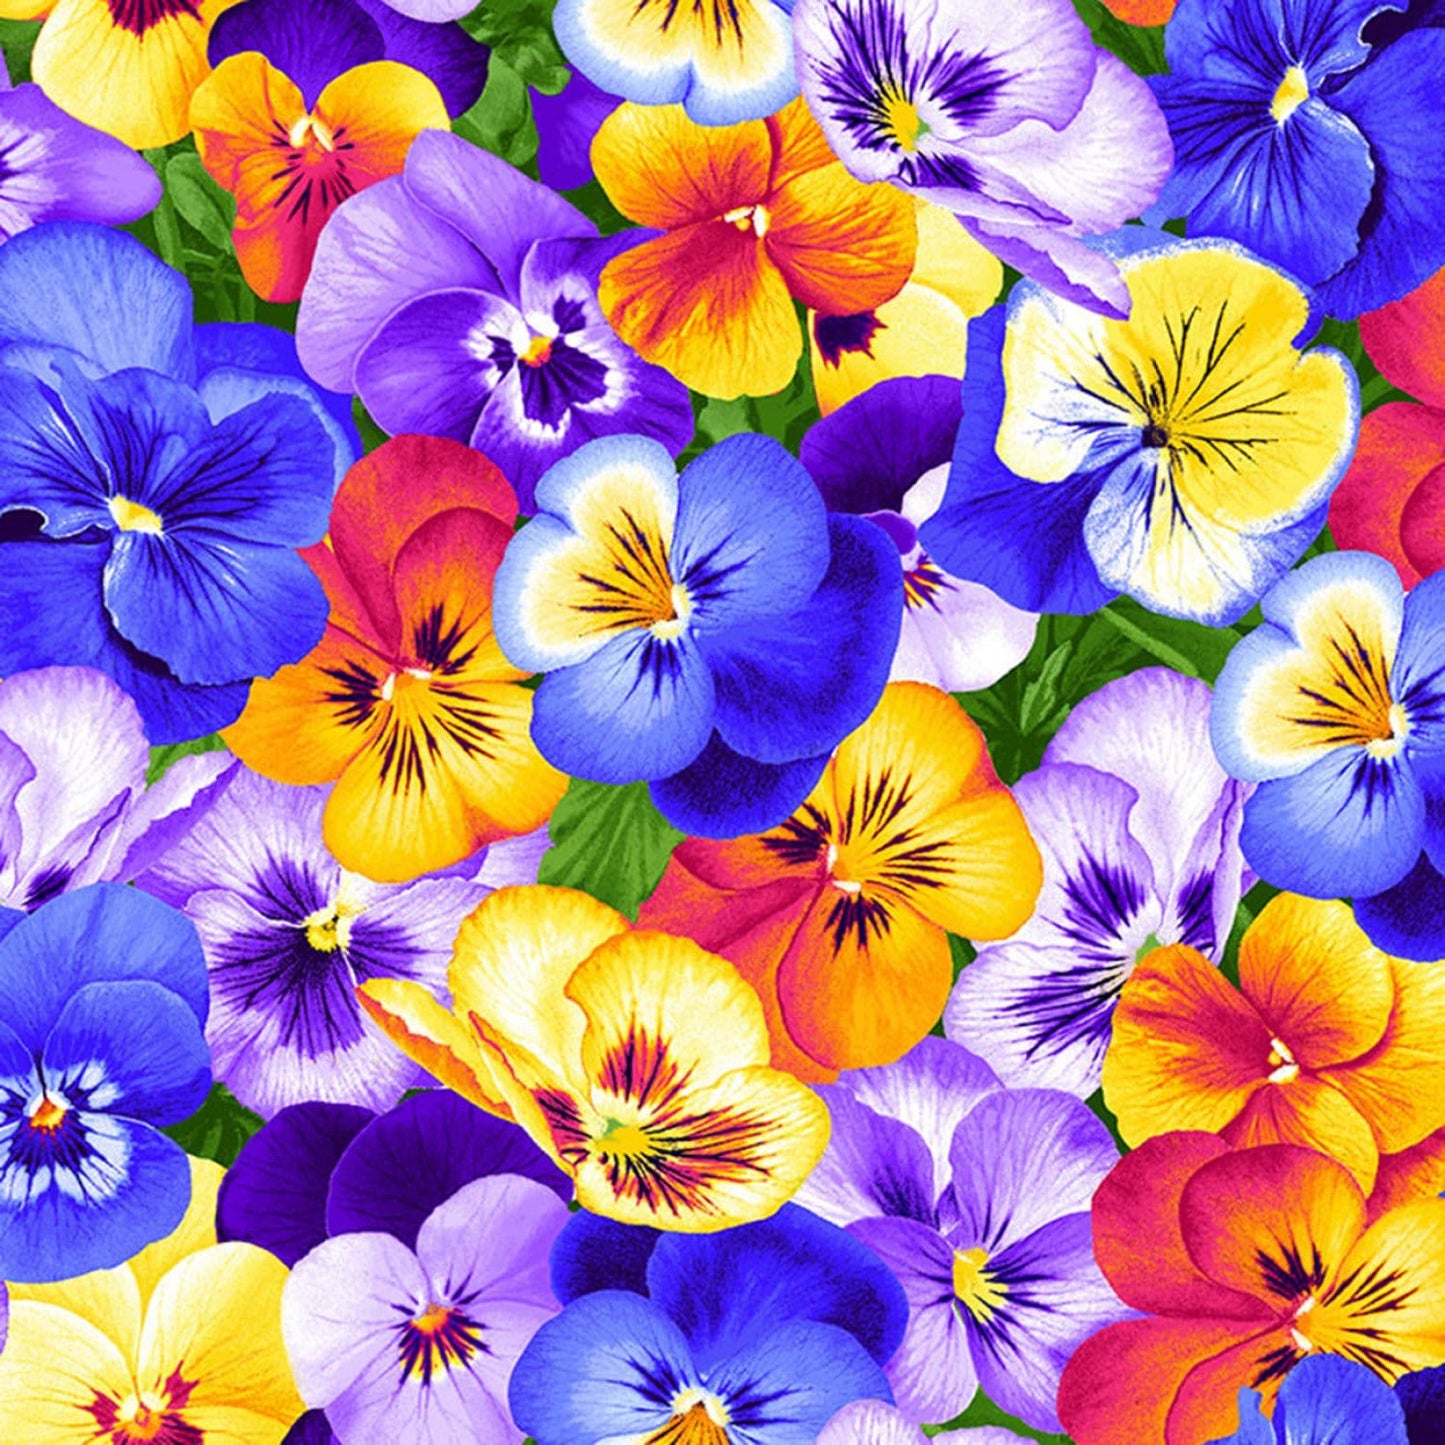 Pansy fabric - Timeless Treasures - 100% cotton - Packed Pansies quilting fabric floral material purple flowers